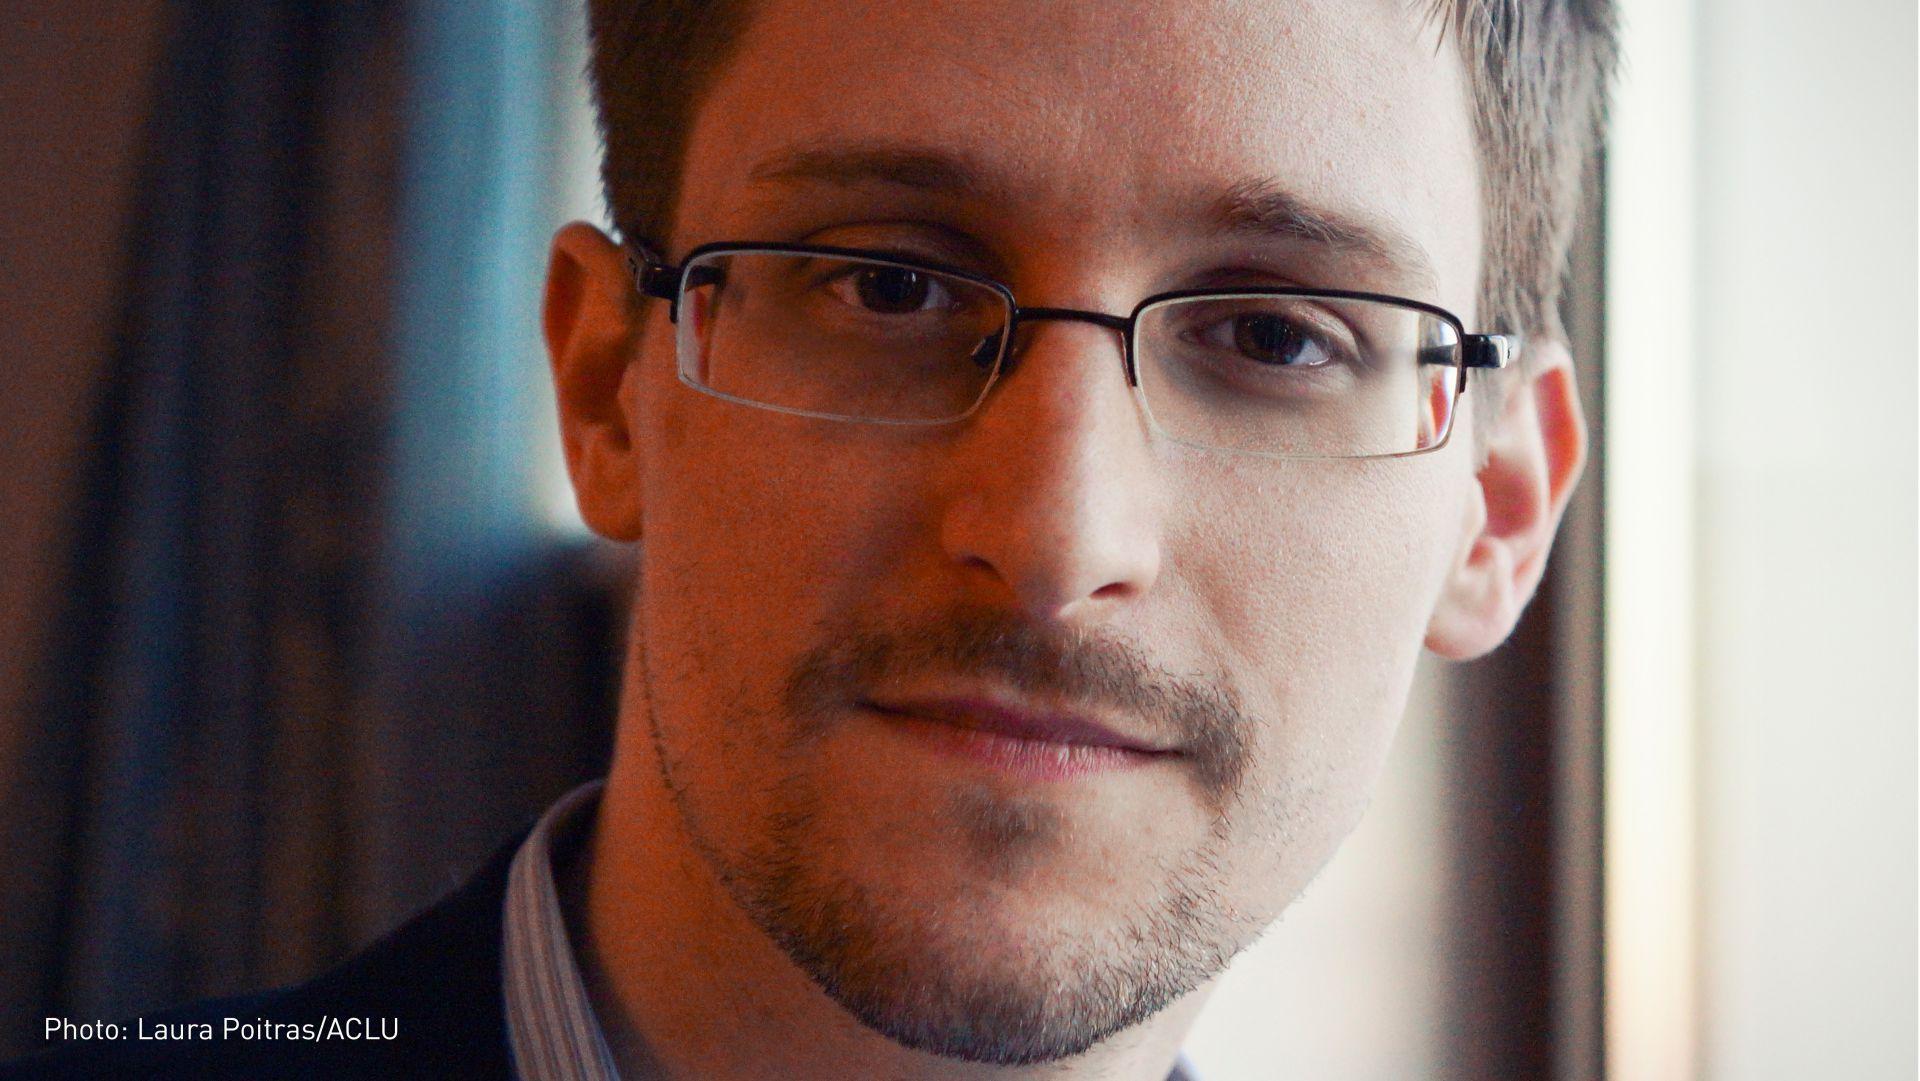 StartPage.com & Privacy Expert Philip Zimmermann Dialogue with Edward Snowden